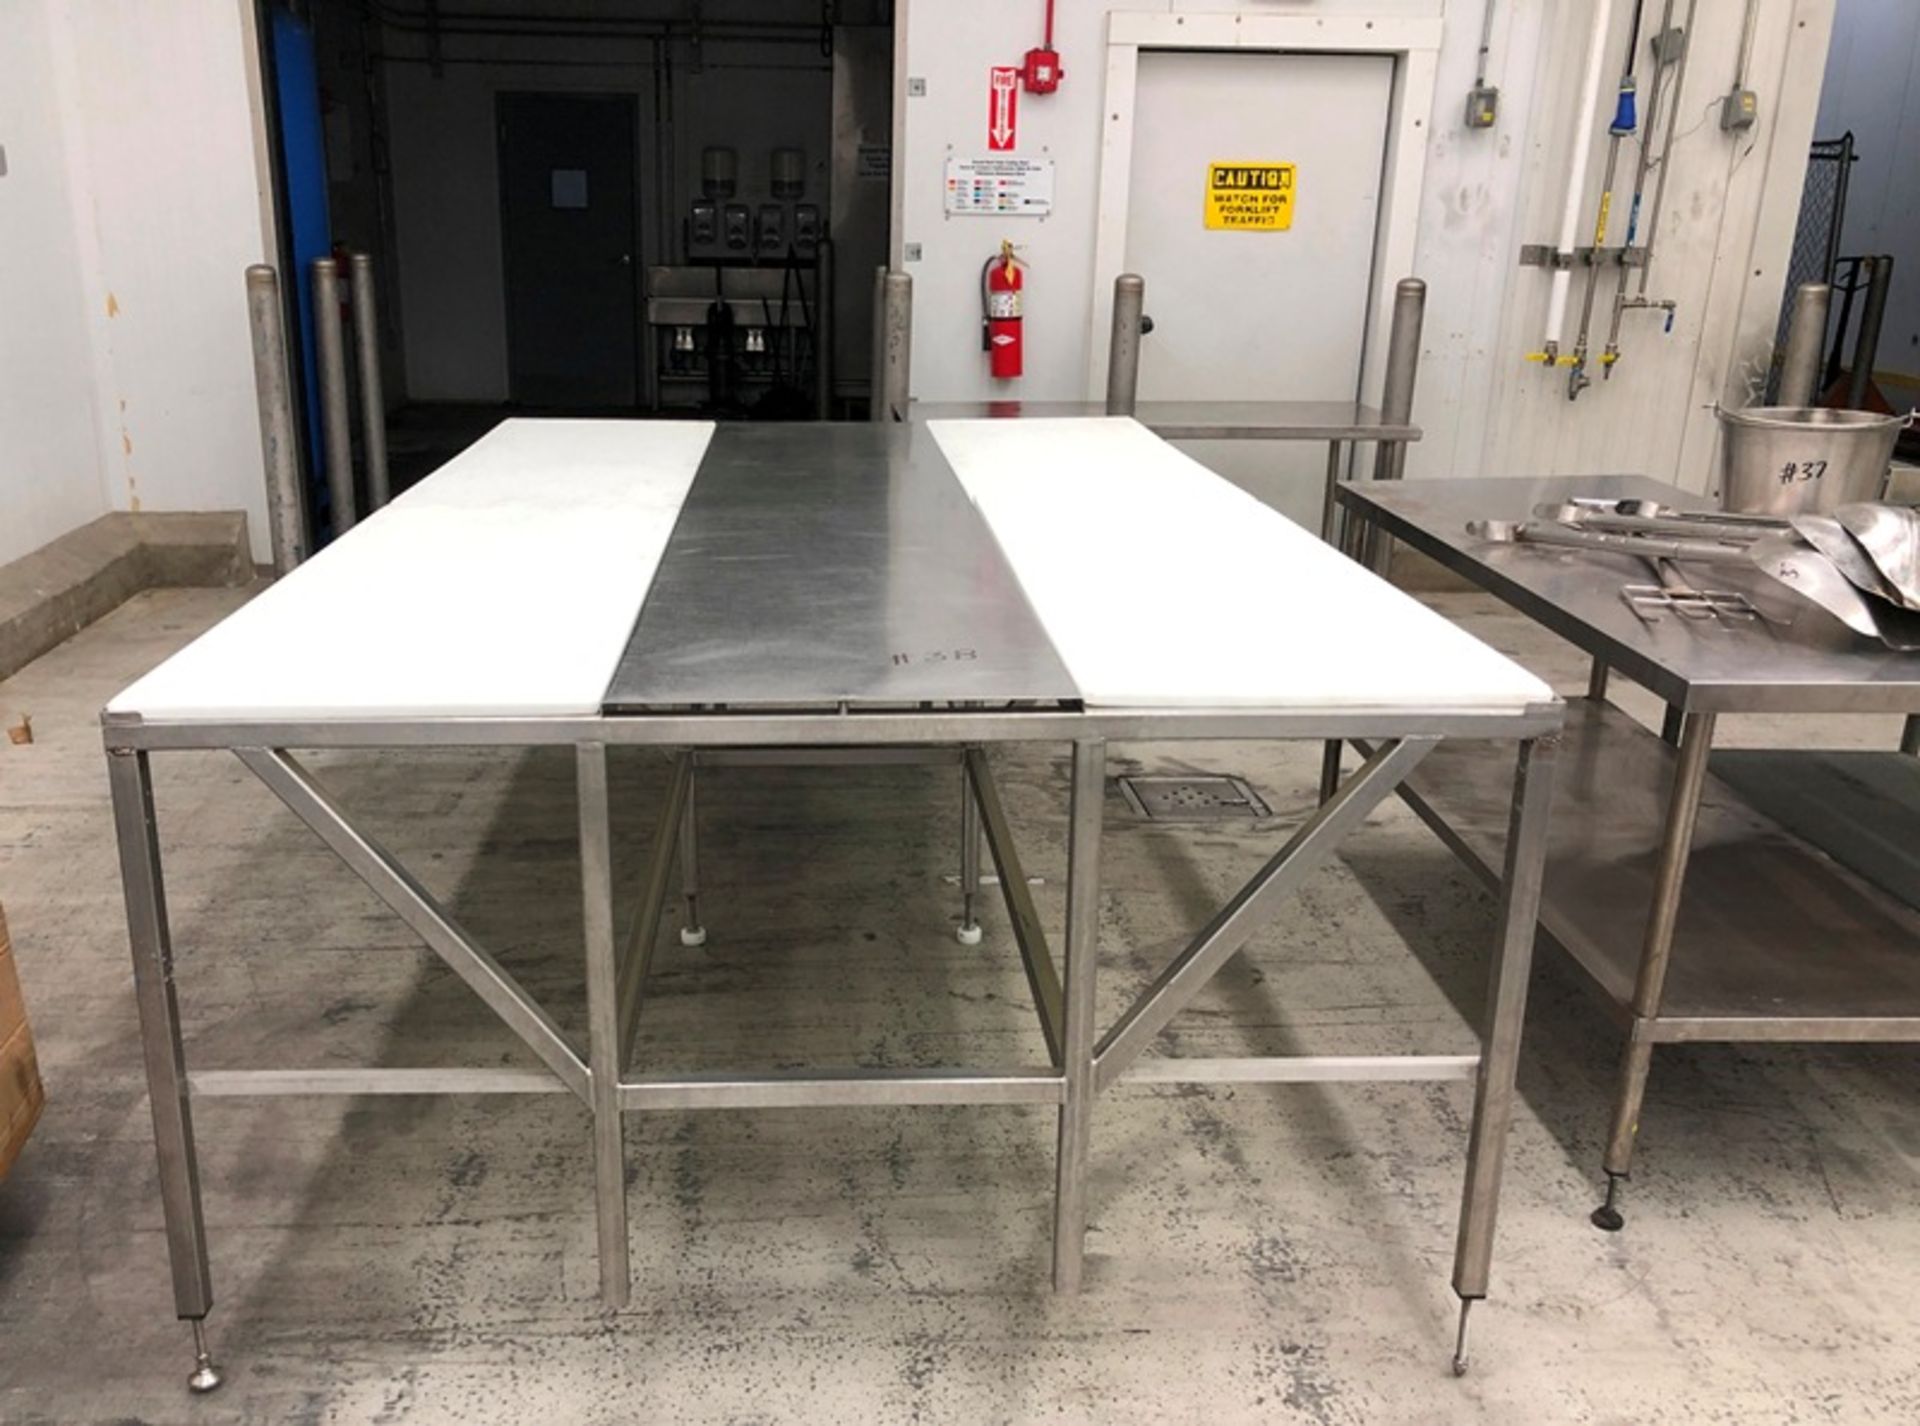 Trim Table, 10'x6'x40", (4) 5'x24" Cutting boards on each side, 10'x24" center, stainless steel